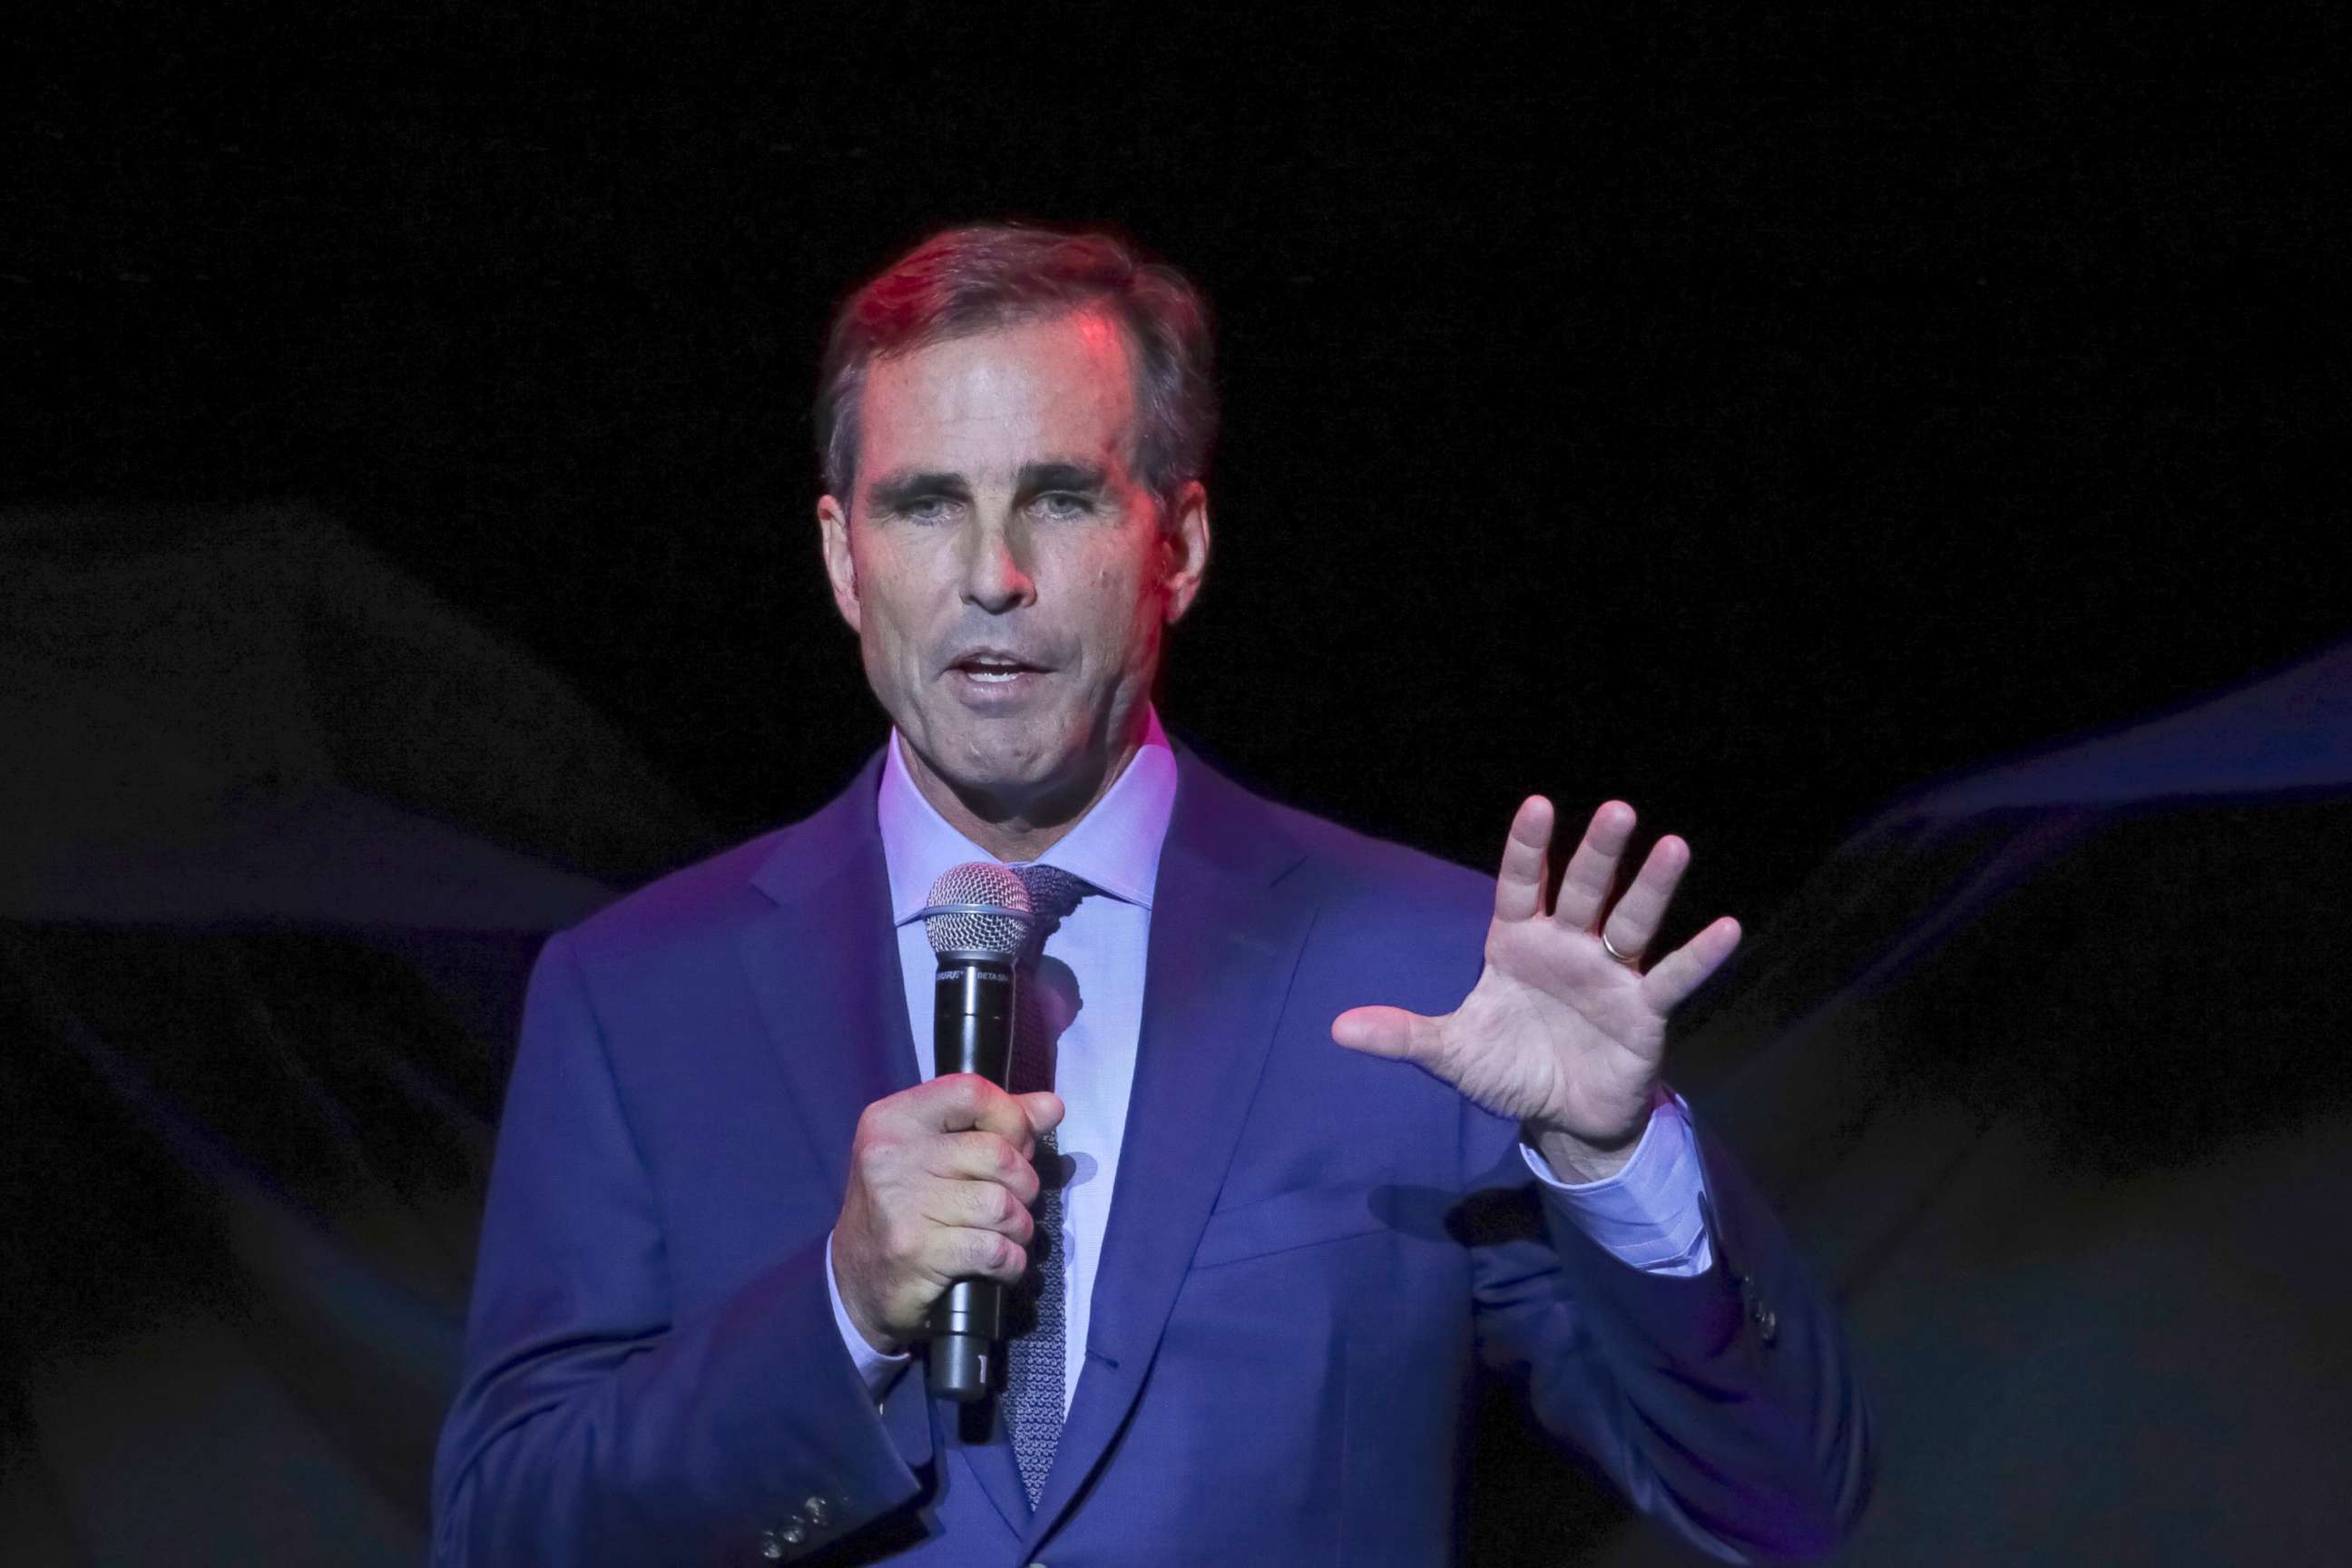 PHOTO: Bob Woodruff, the Co-Founder of the Bob Woodruff Foundation, speaks on stage during the 11th Annual Stand Up for Heroes benefit Nov. 7, 2017, in New York, N.Y.